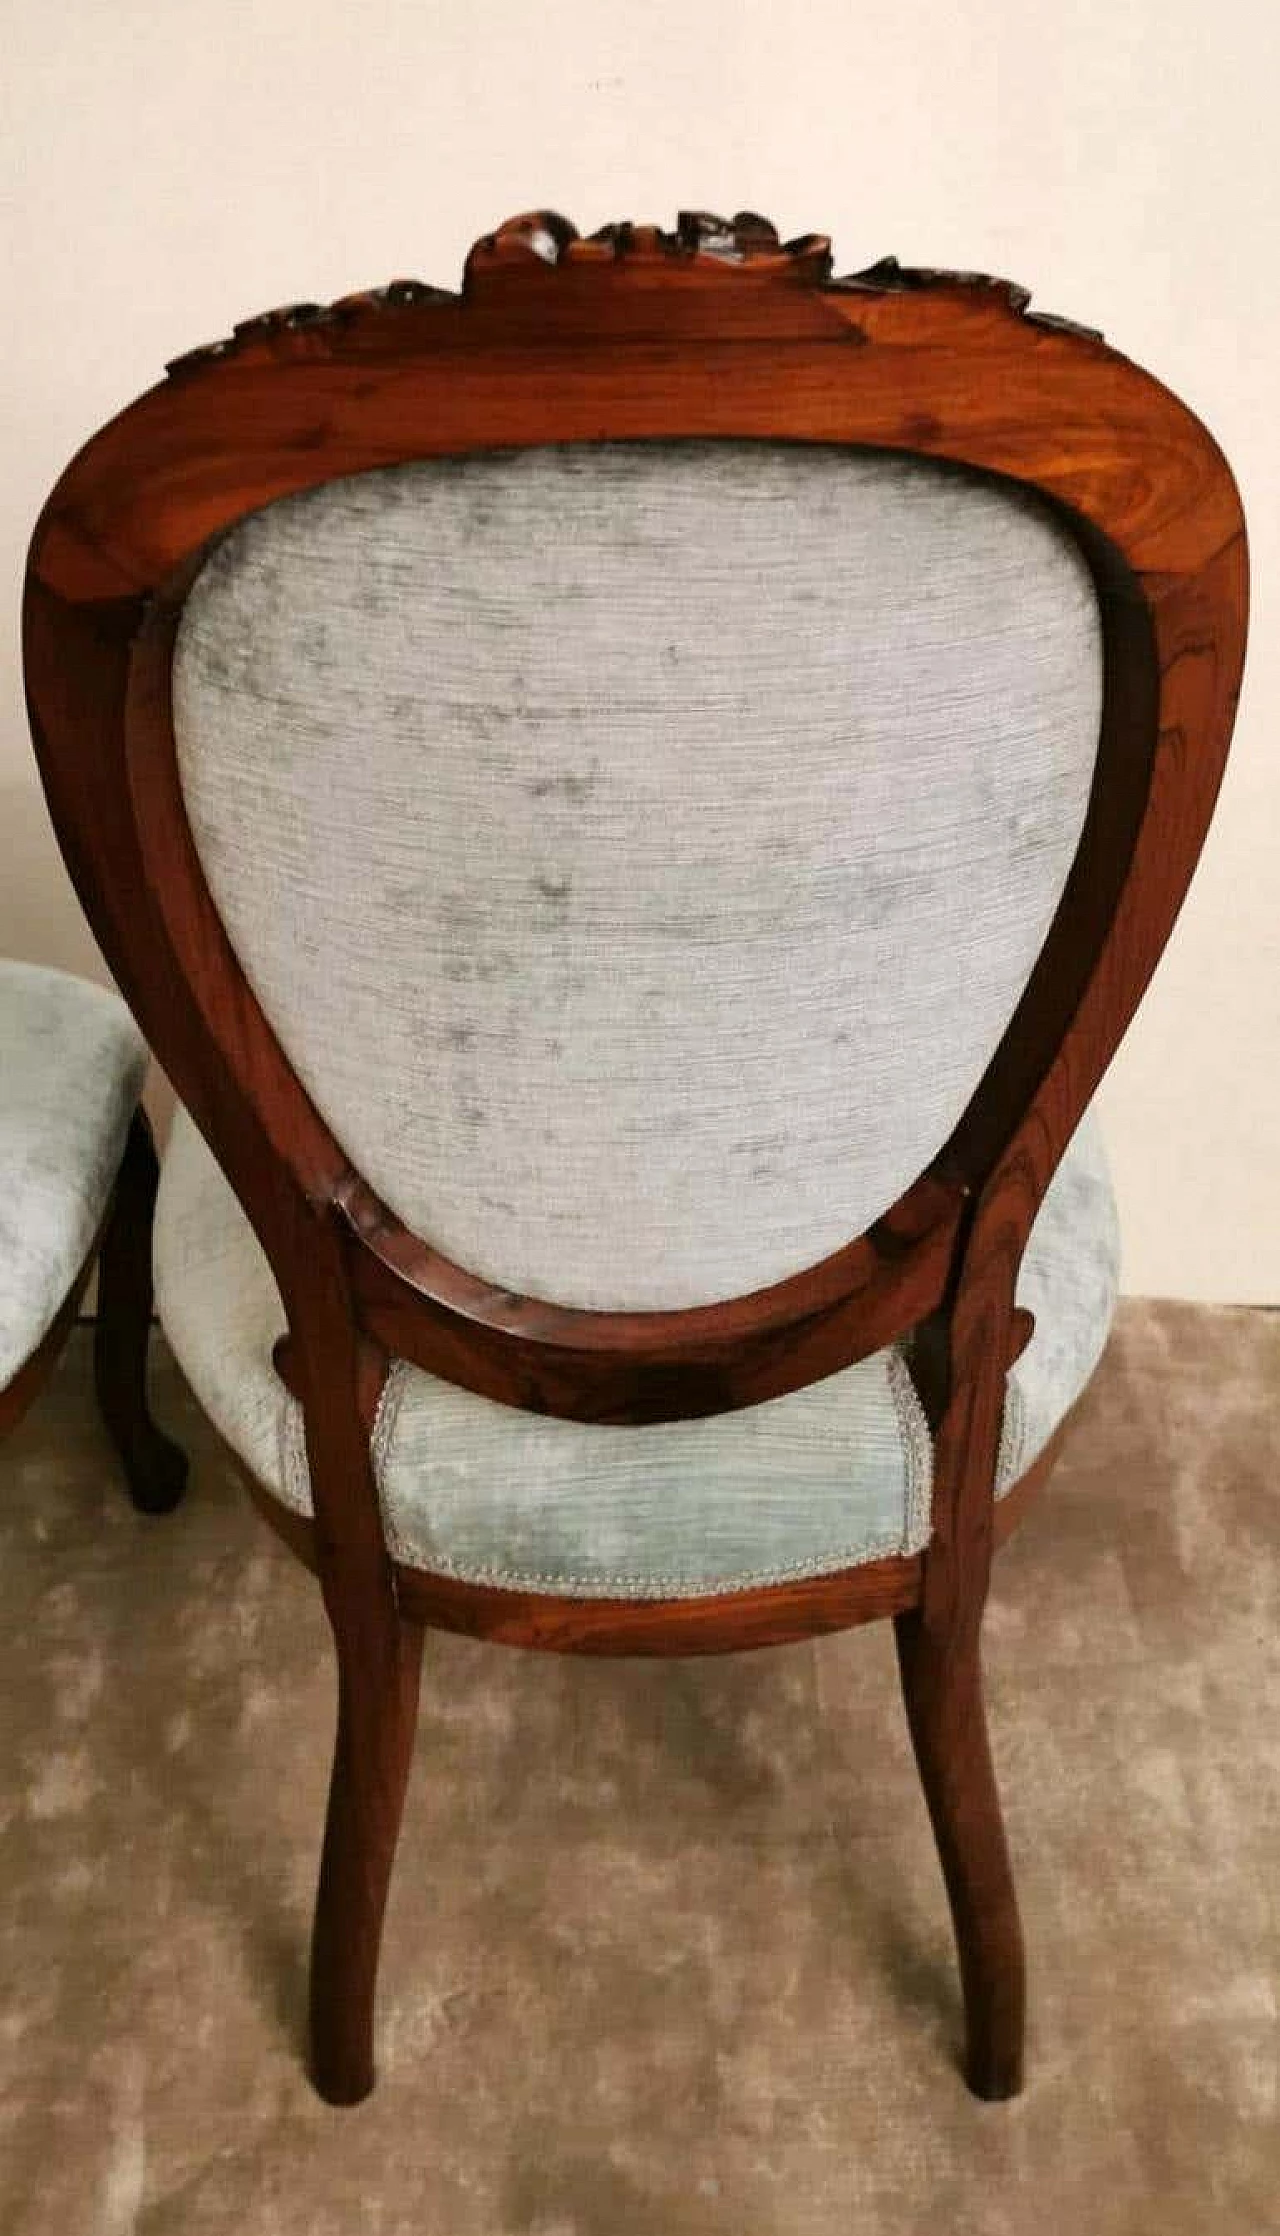 Pair of Napoleon III bedroom chairs in carved mahogany, 19th century 1188989